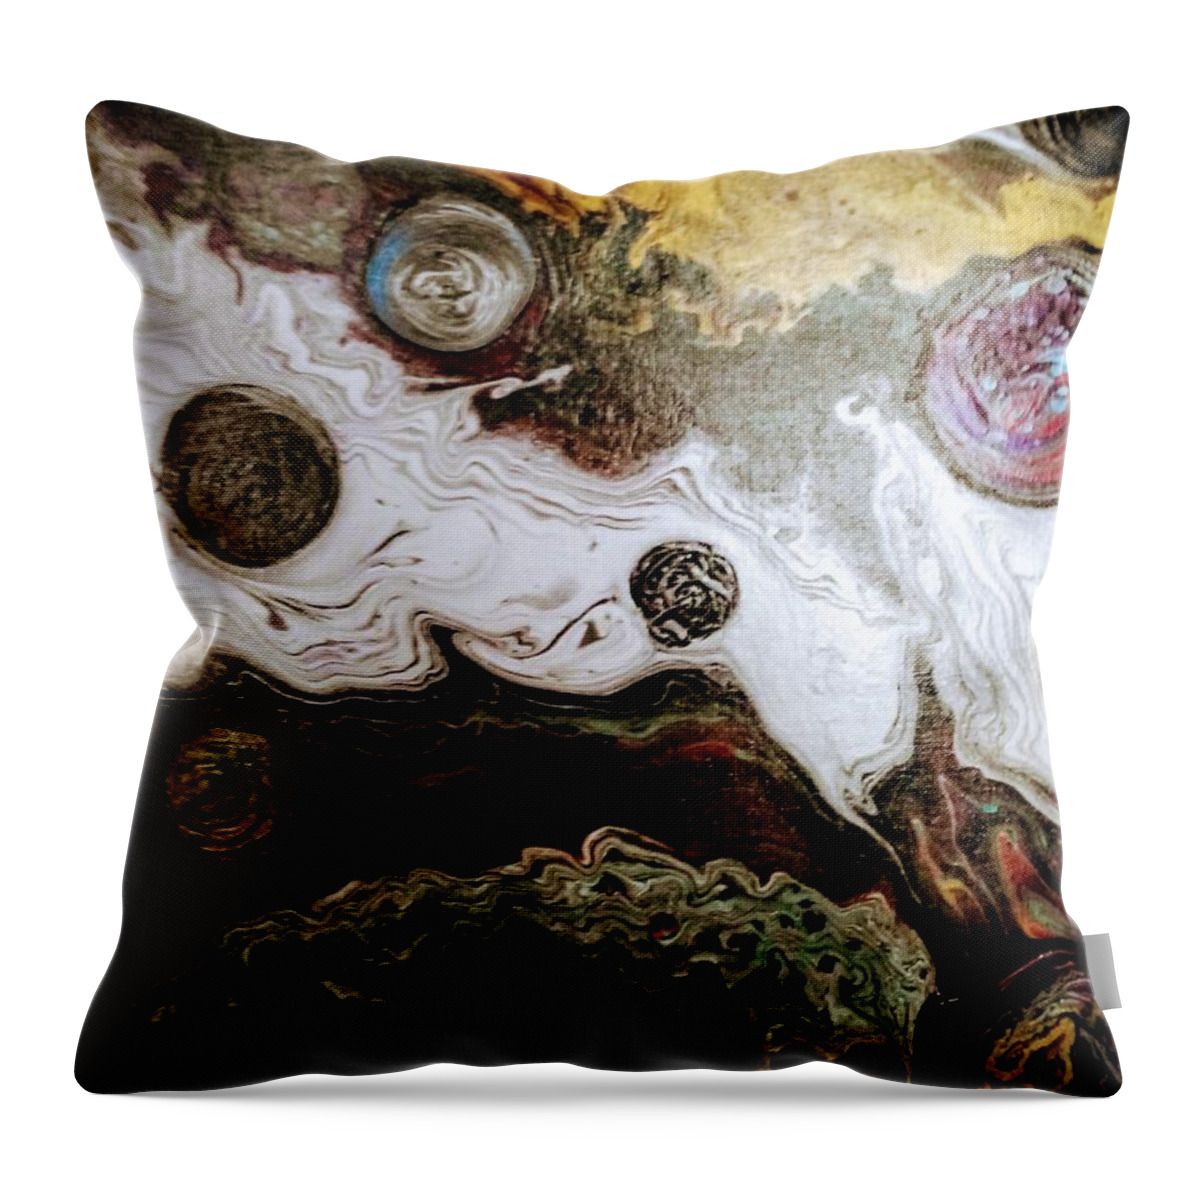 Metallic Throw Pillow featuring the painting Space Metal by Anna Adams